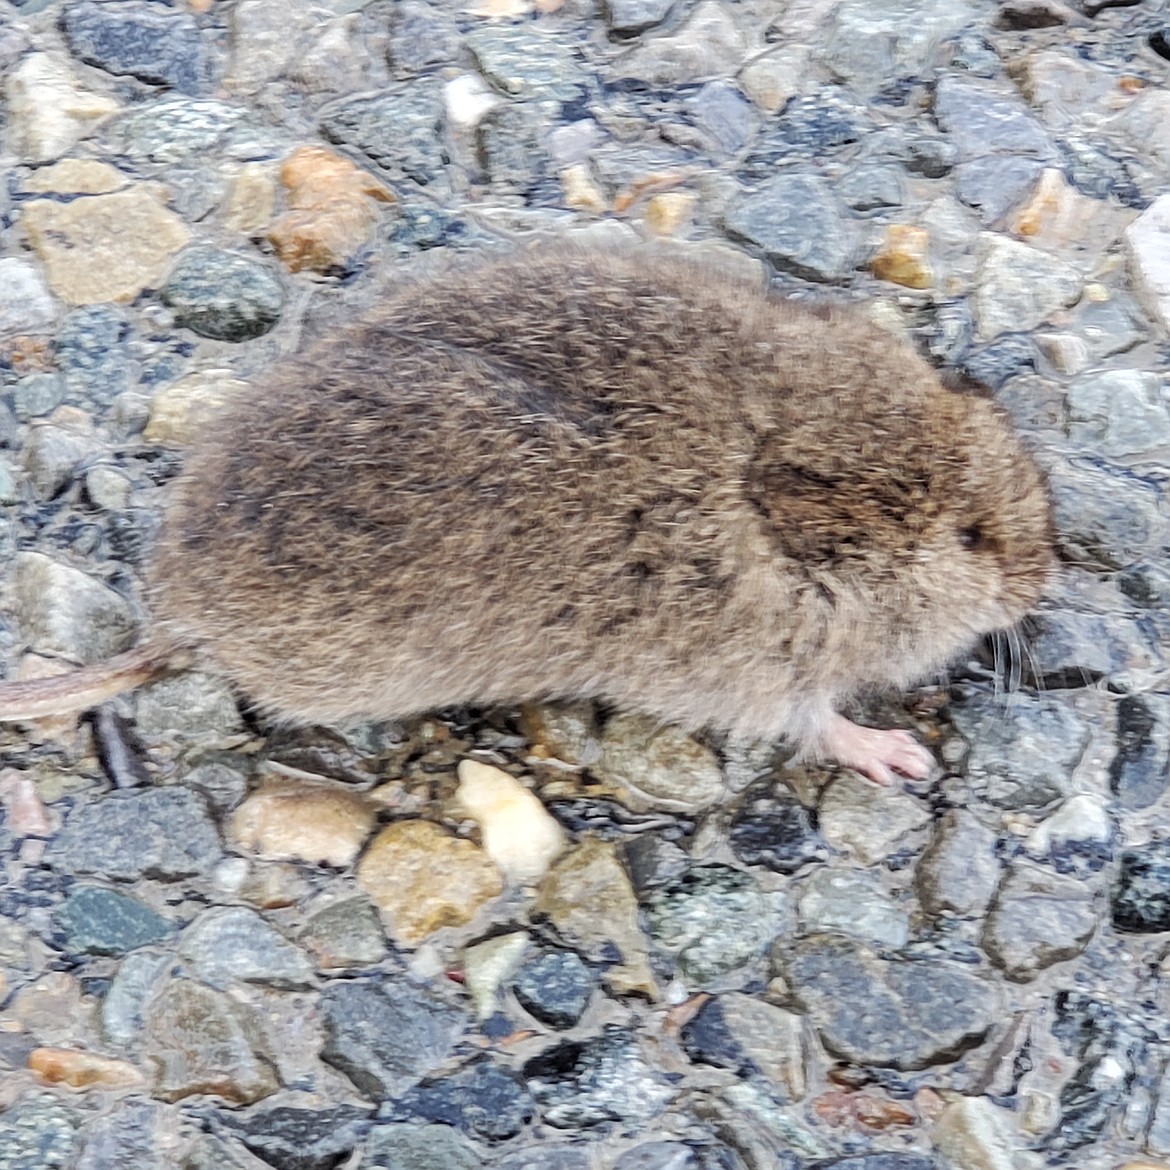 Meadow voles are one of the most common and prolific small mammals in North America.